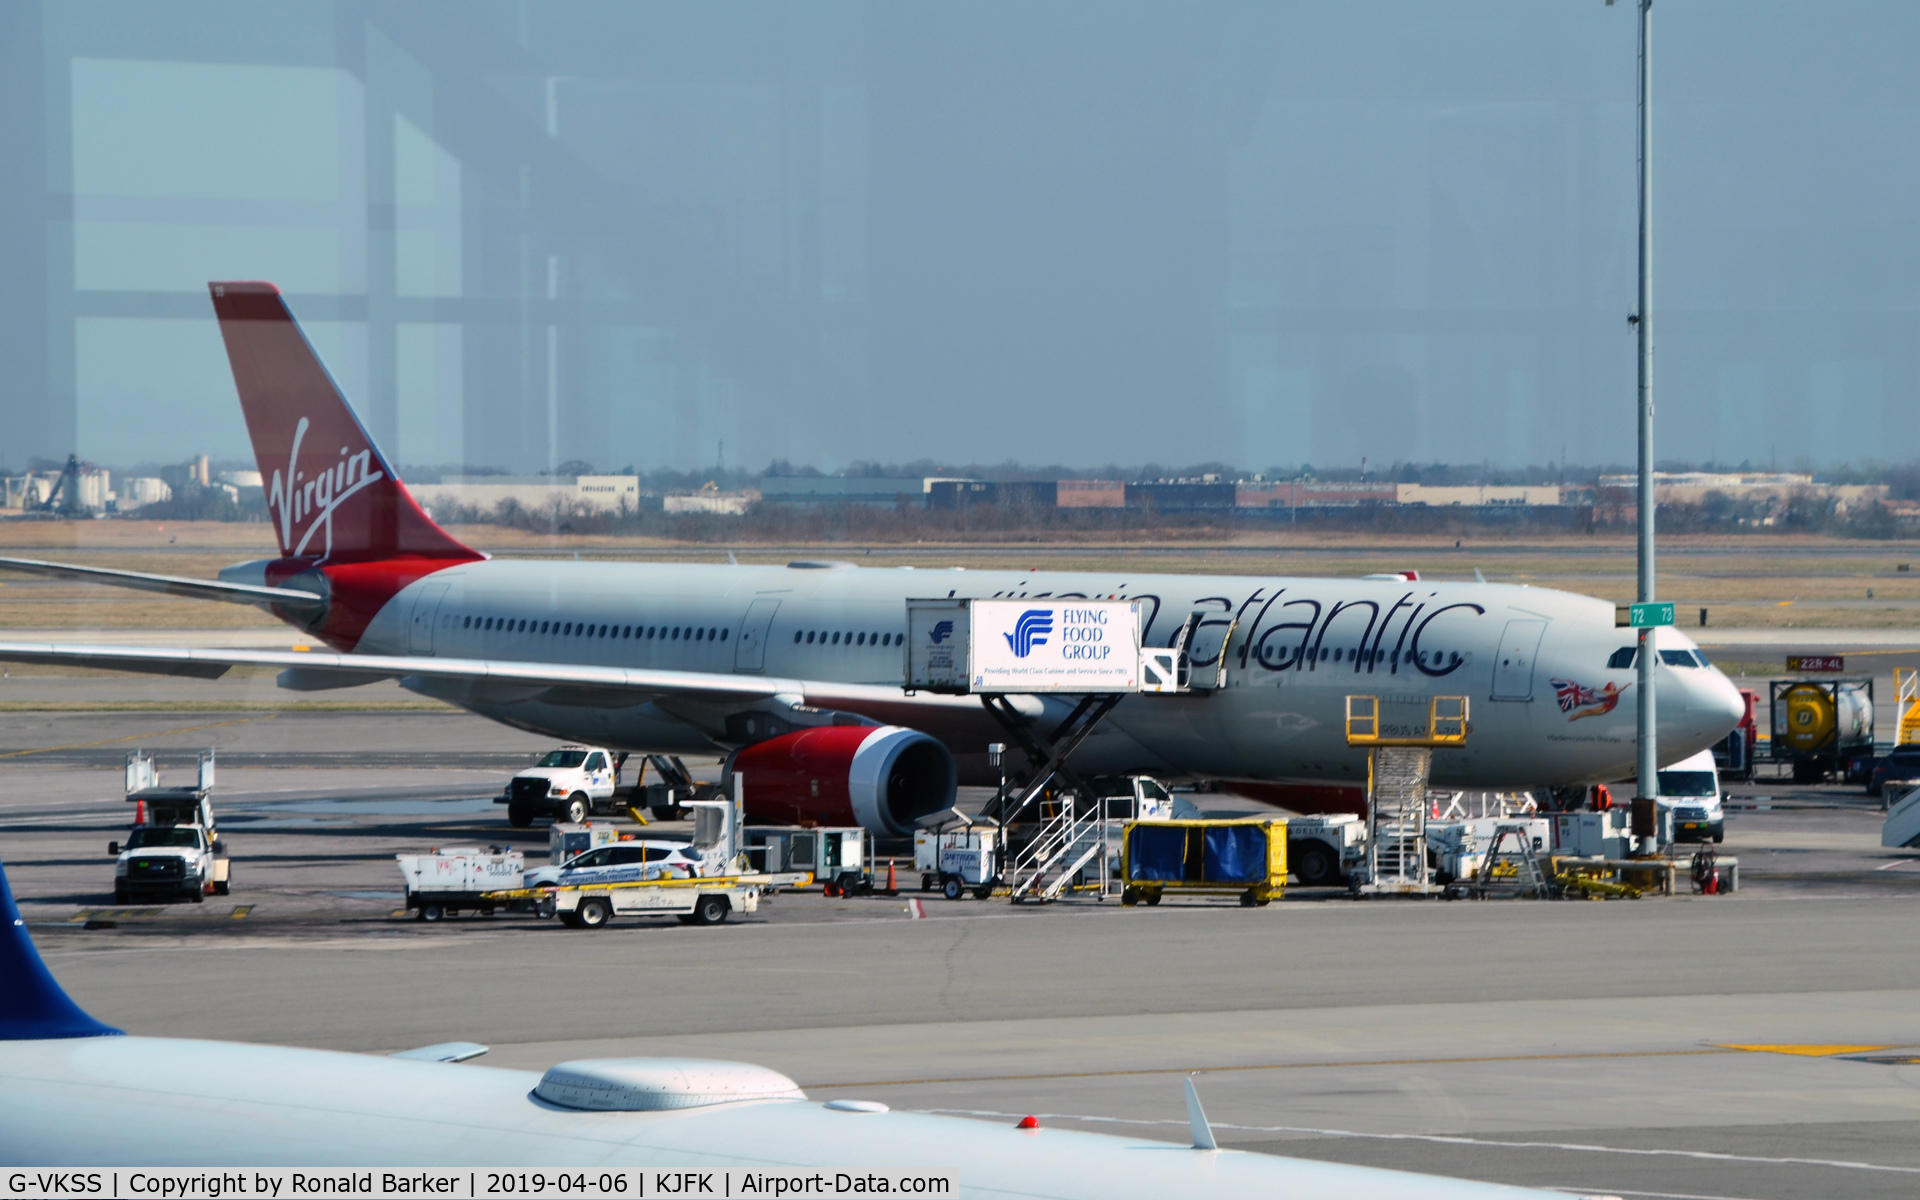 G-VKSS, 2010 Airbus A330-343X C/N 1201, Service area JFK  Mademoiselle Rouge